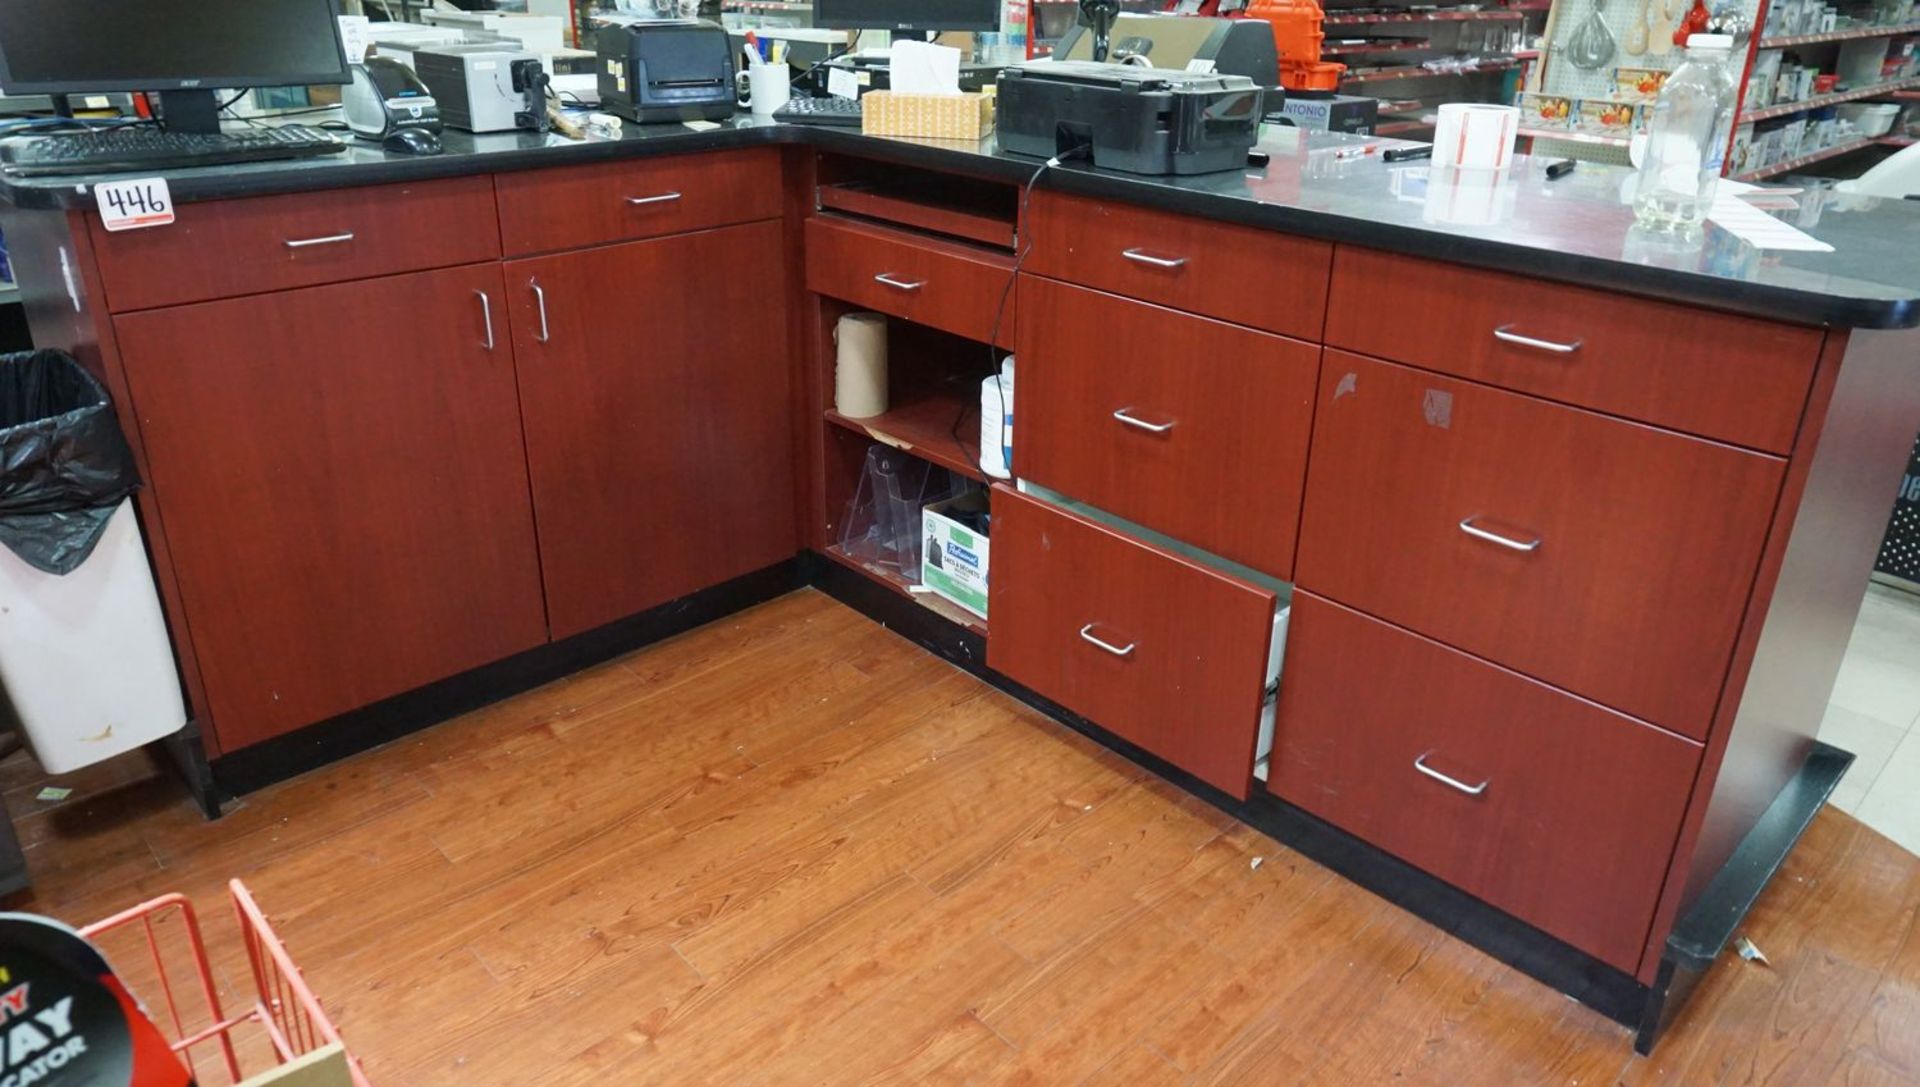 APPROX 107" X 7' U-SHAPED CUSTOMER SERVICE COUNTER - Image 2 of 2